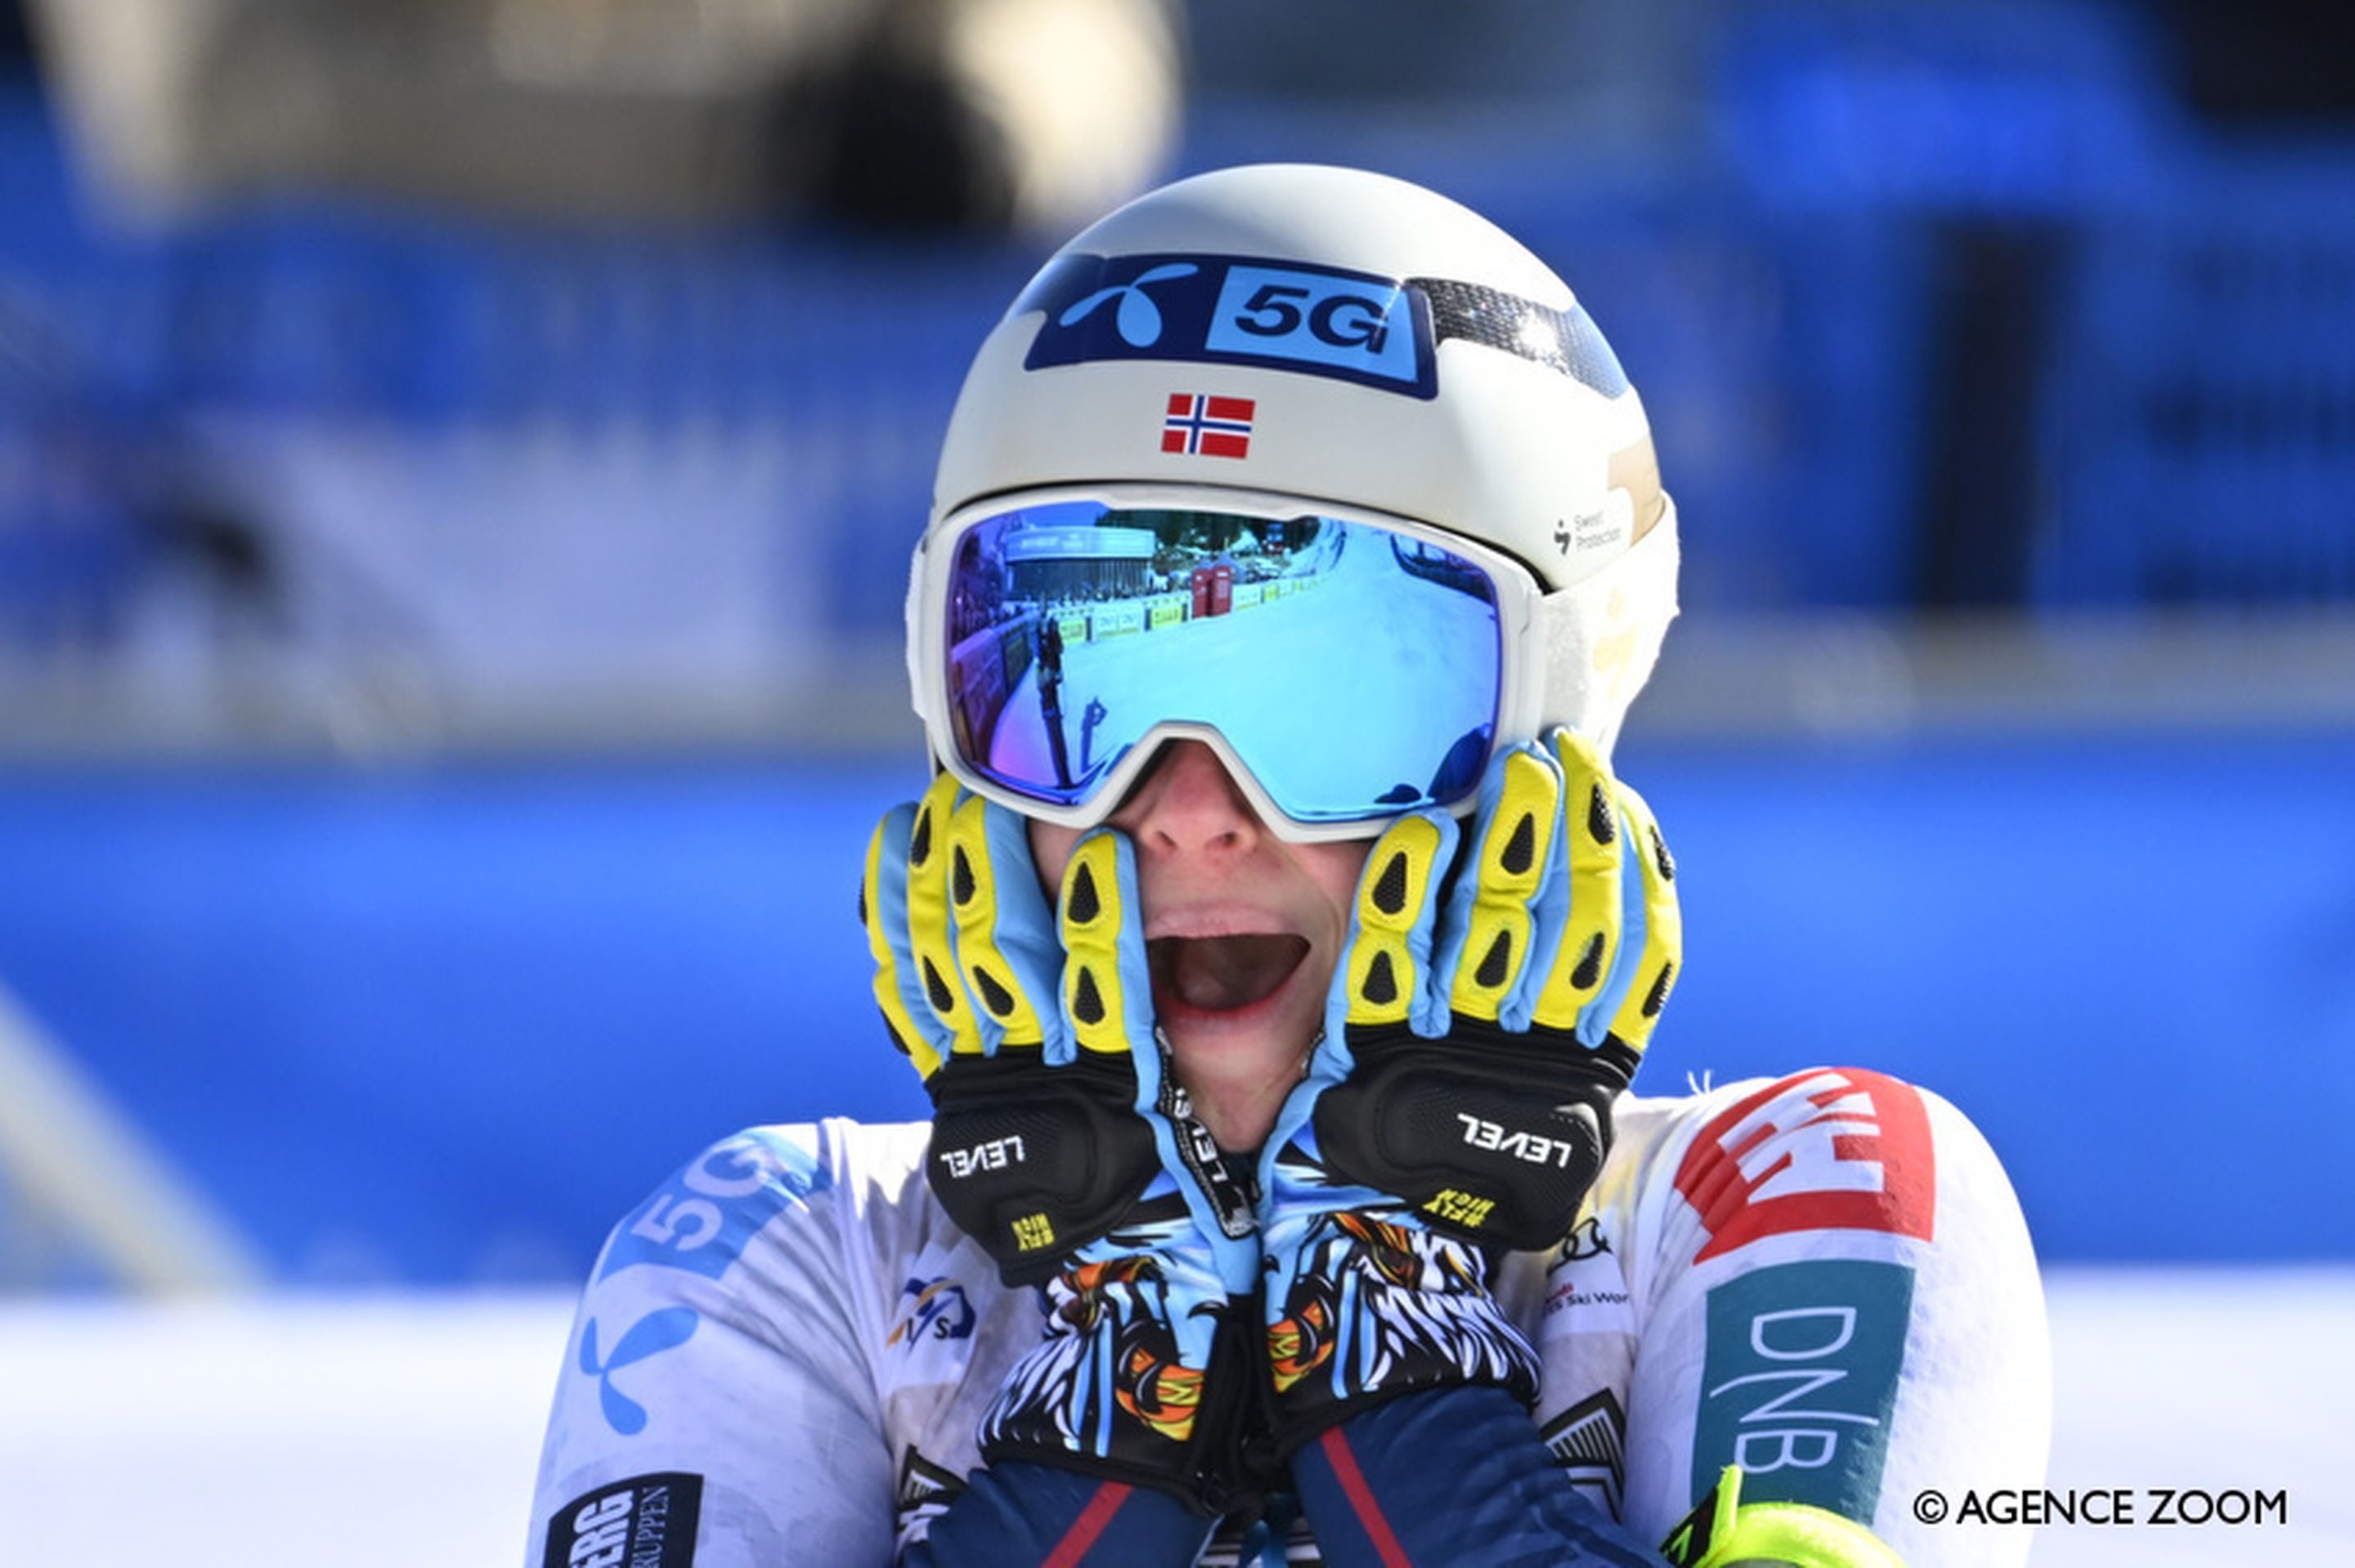 Ragnhild Mowinckel (NOR) celebrates the final victory of her World Cup career in Cortina d'Ampezzo last season